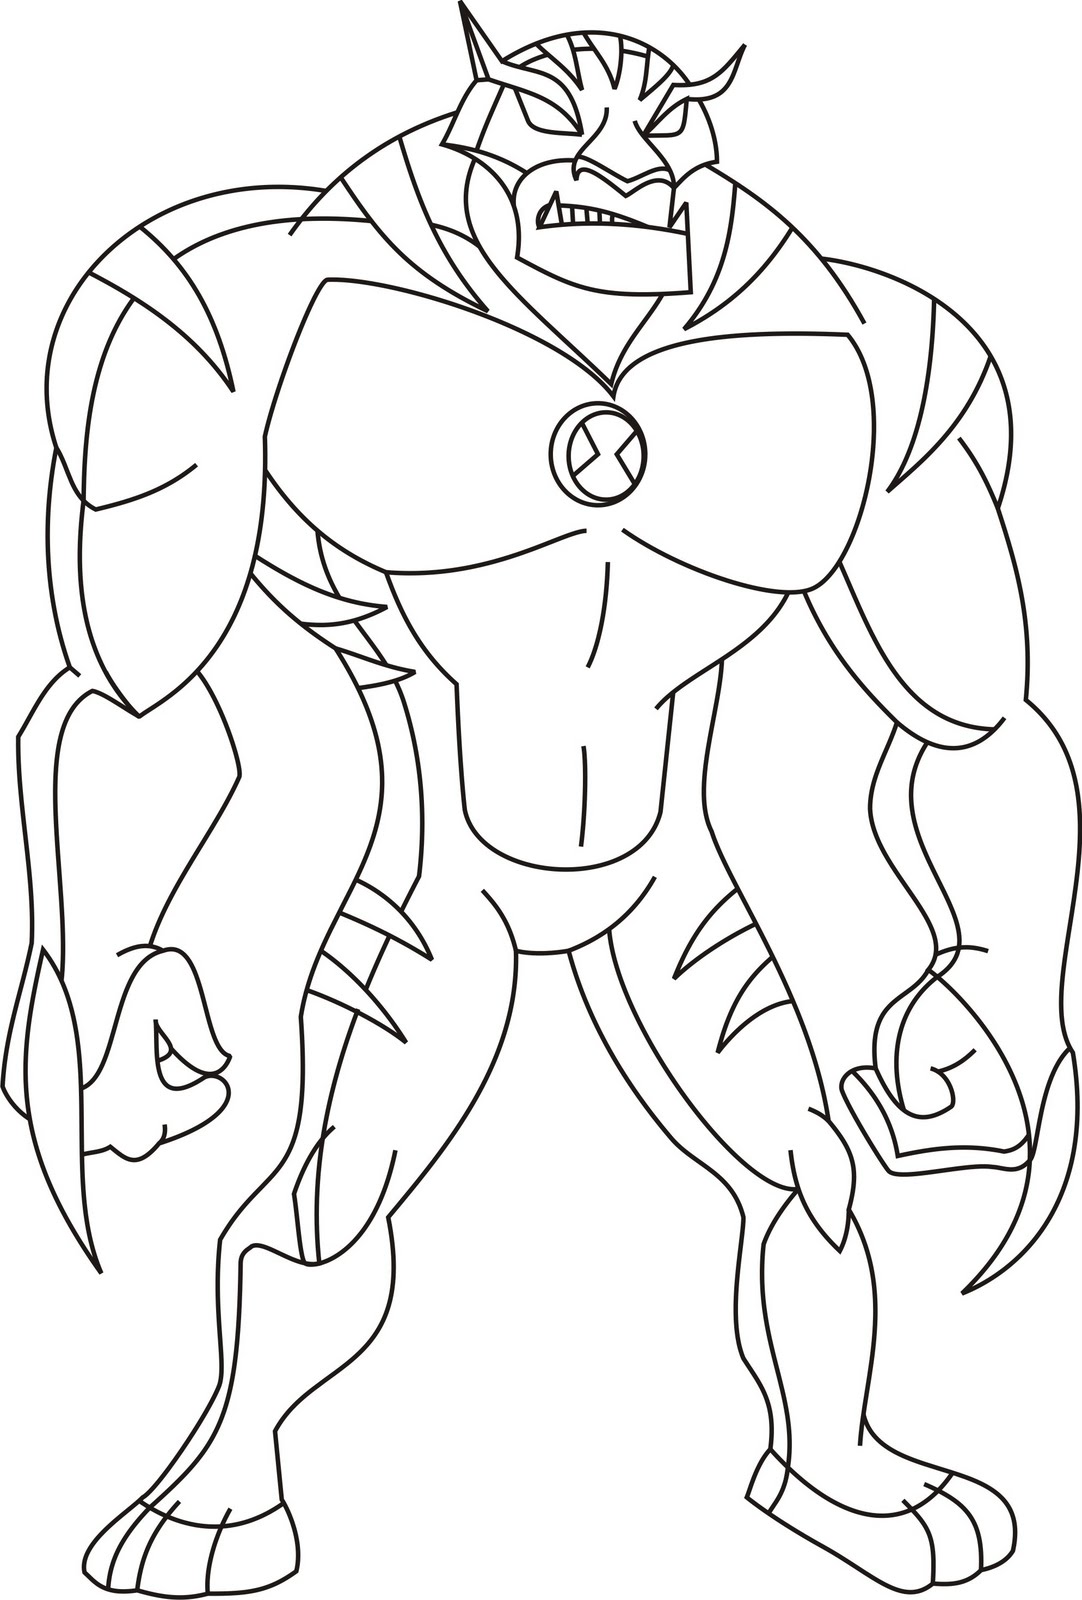 Ben 10 ultimate alien colouring pictures